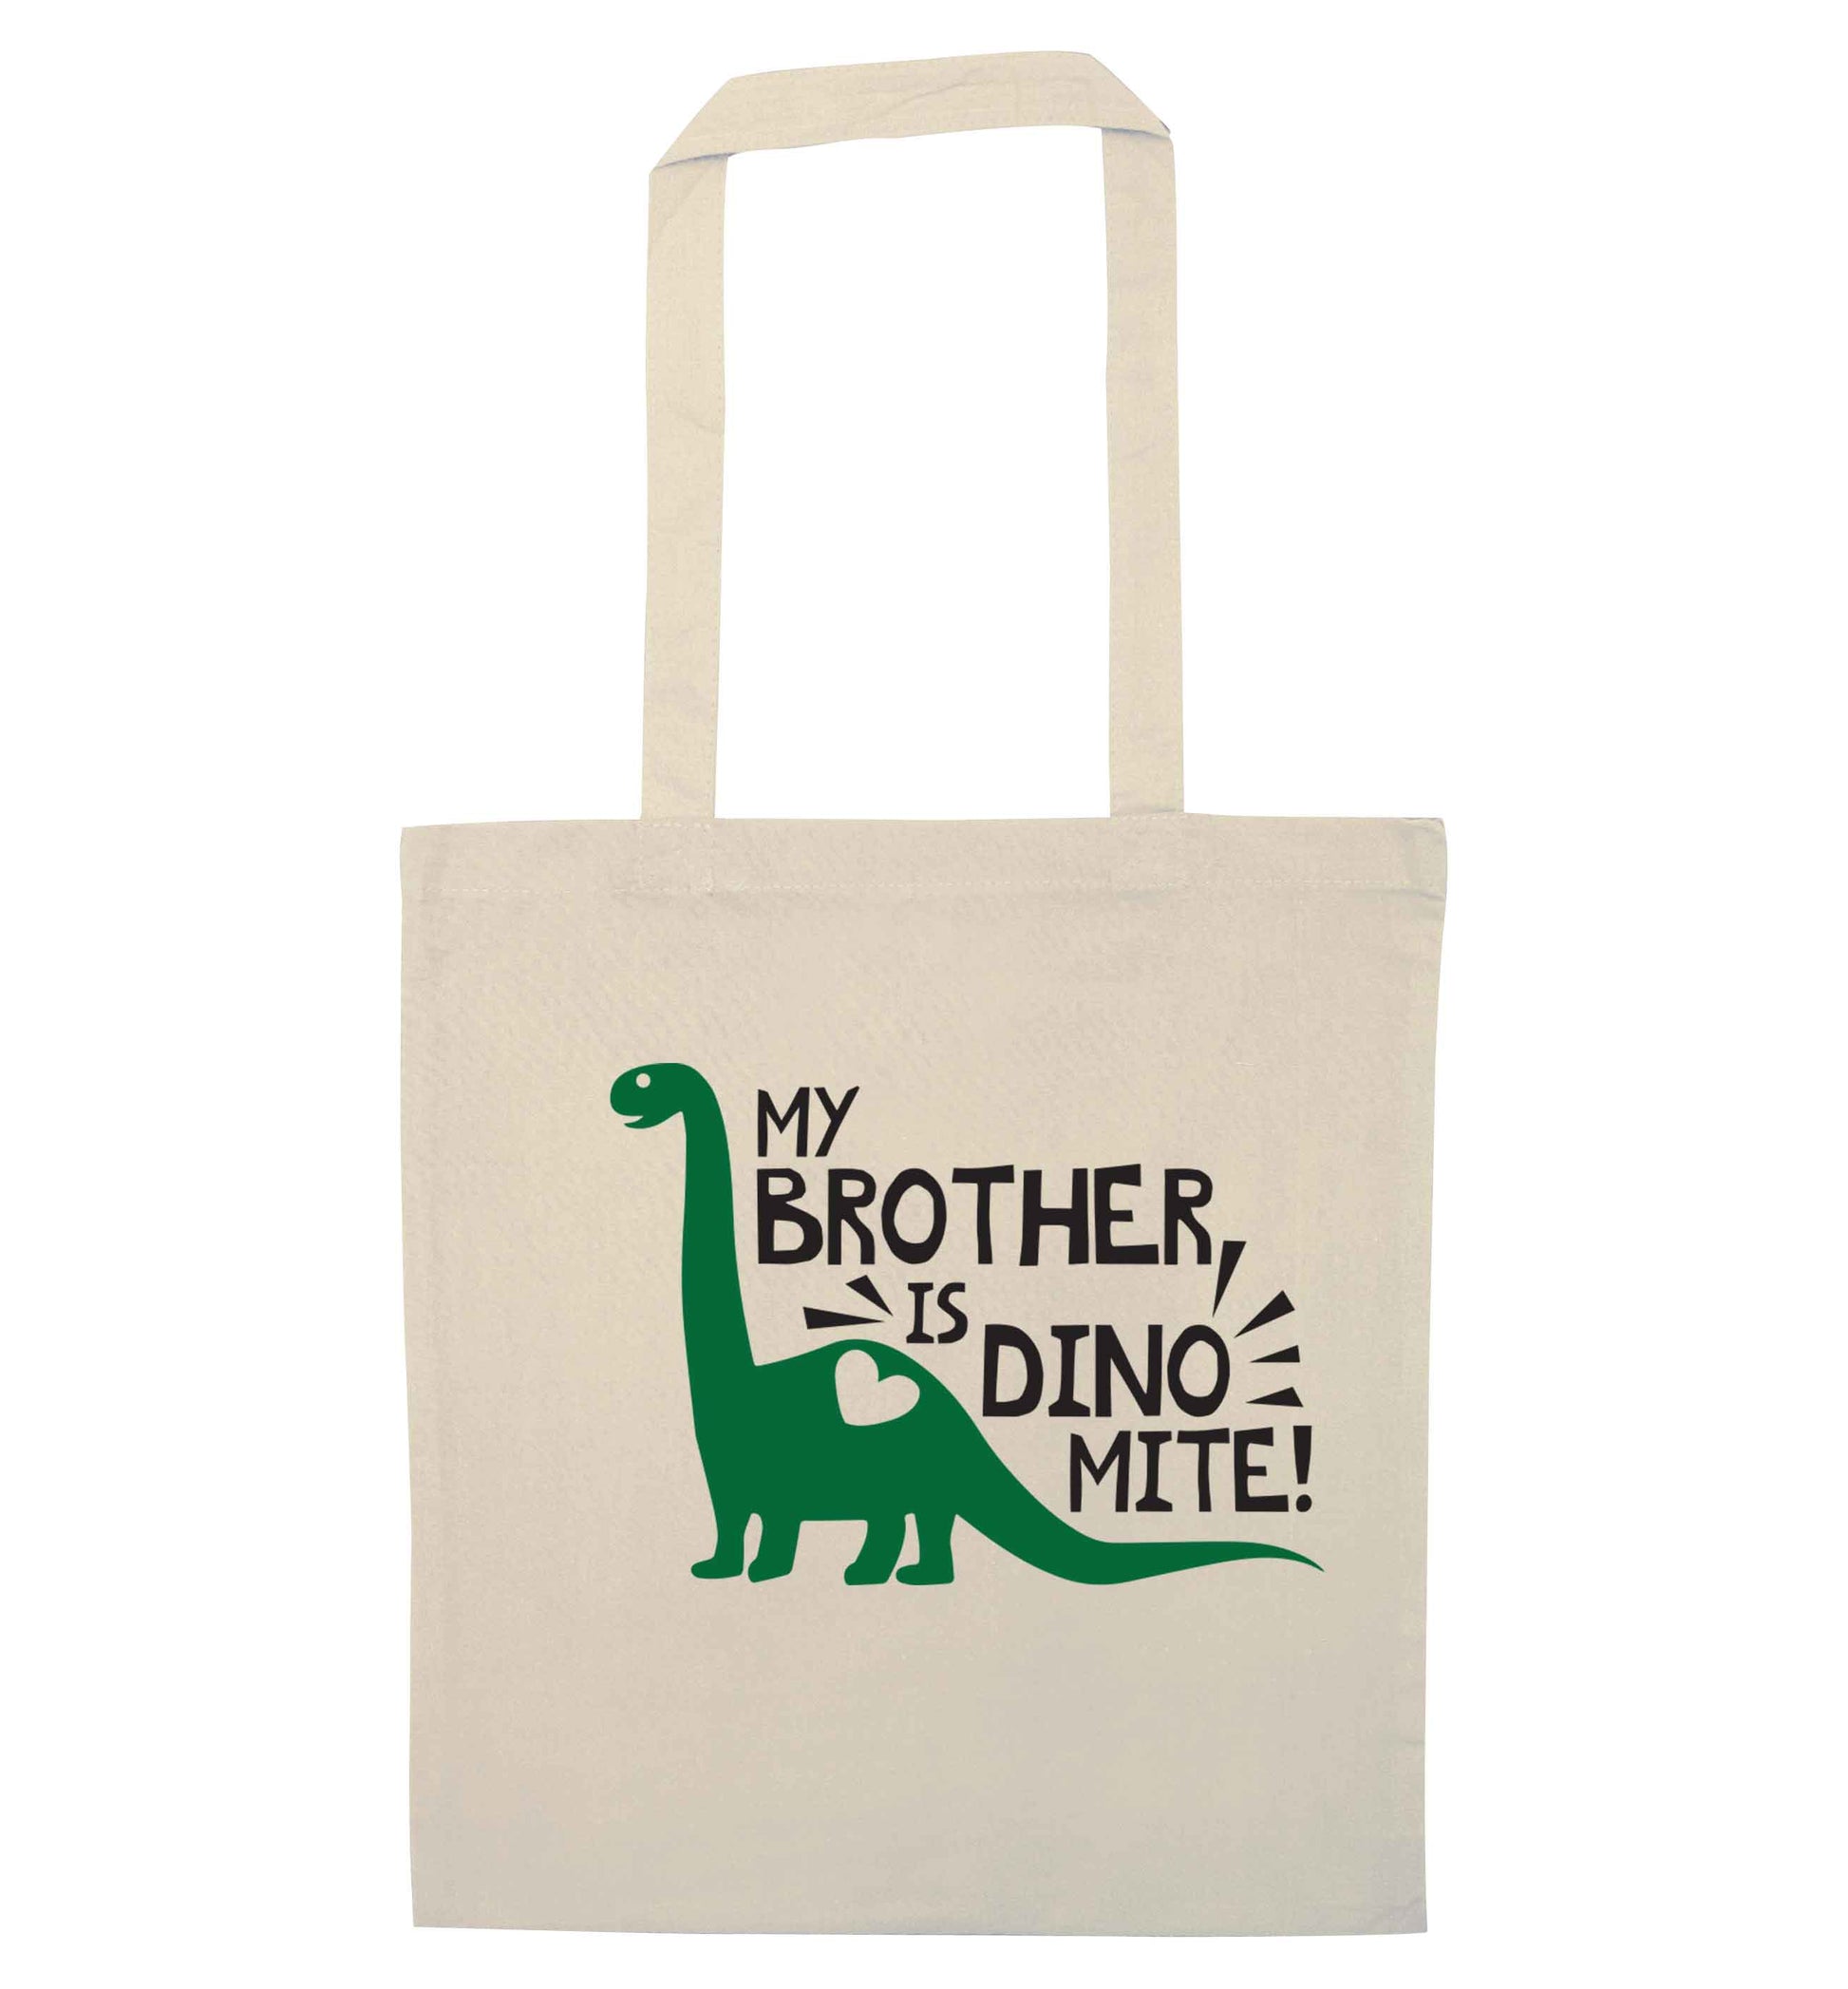 My brother is dinomite! natural tote bag